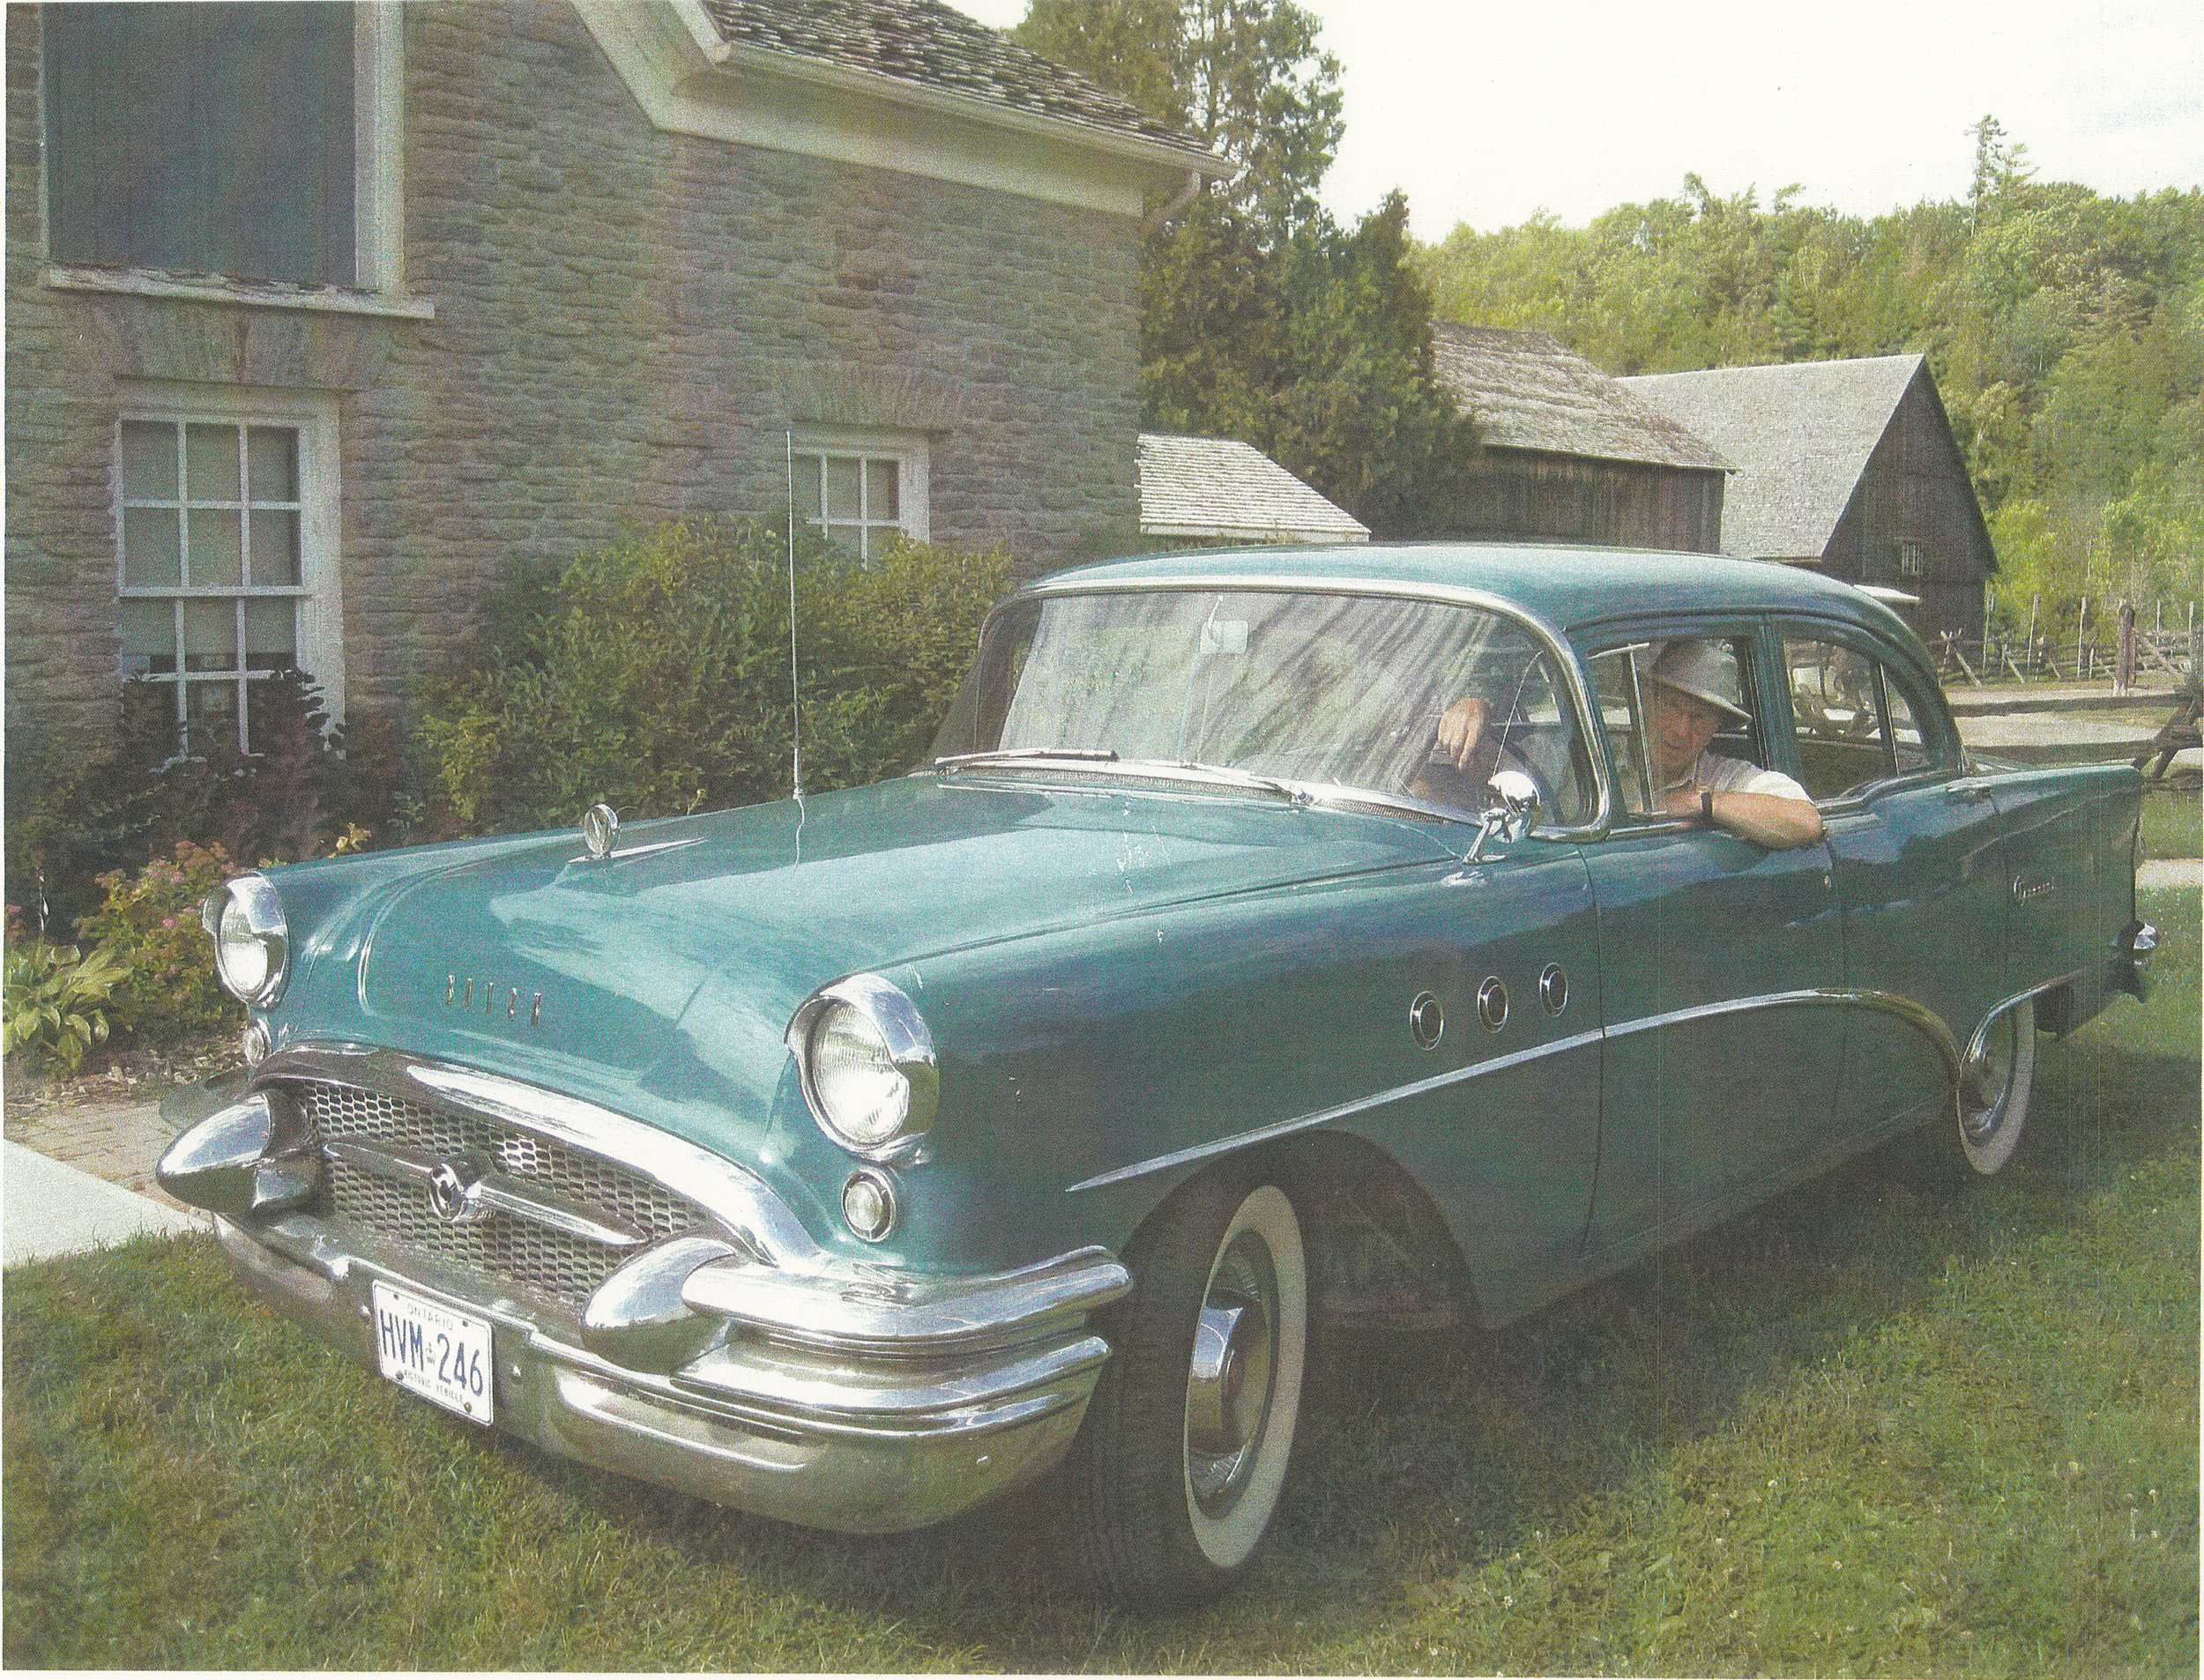 David Mitchell with his 1955 Buick Special in Peterborough, ON circa 2014